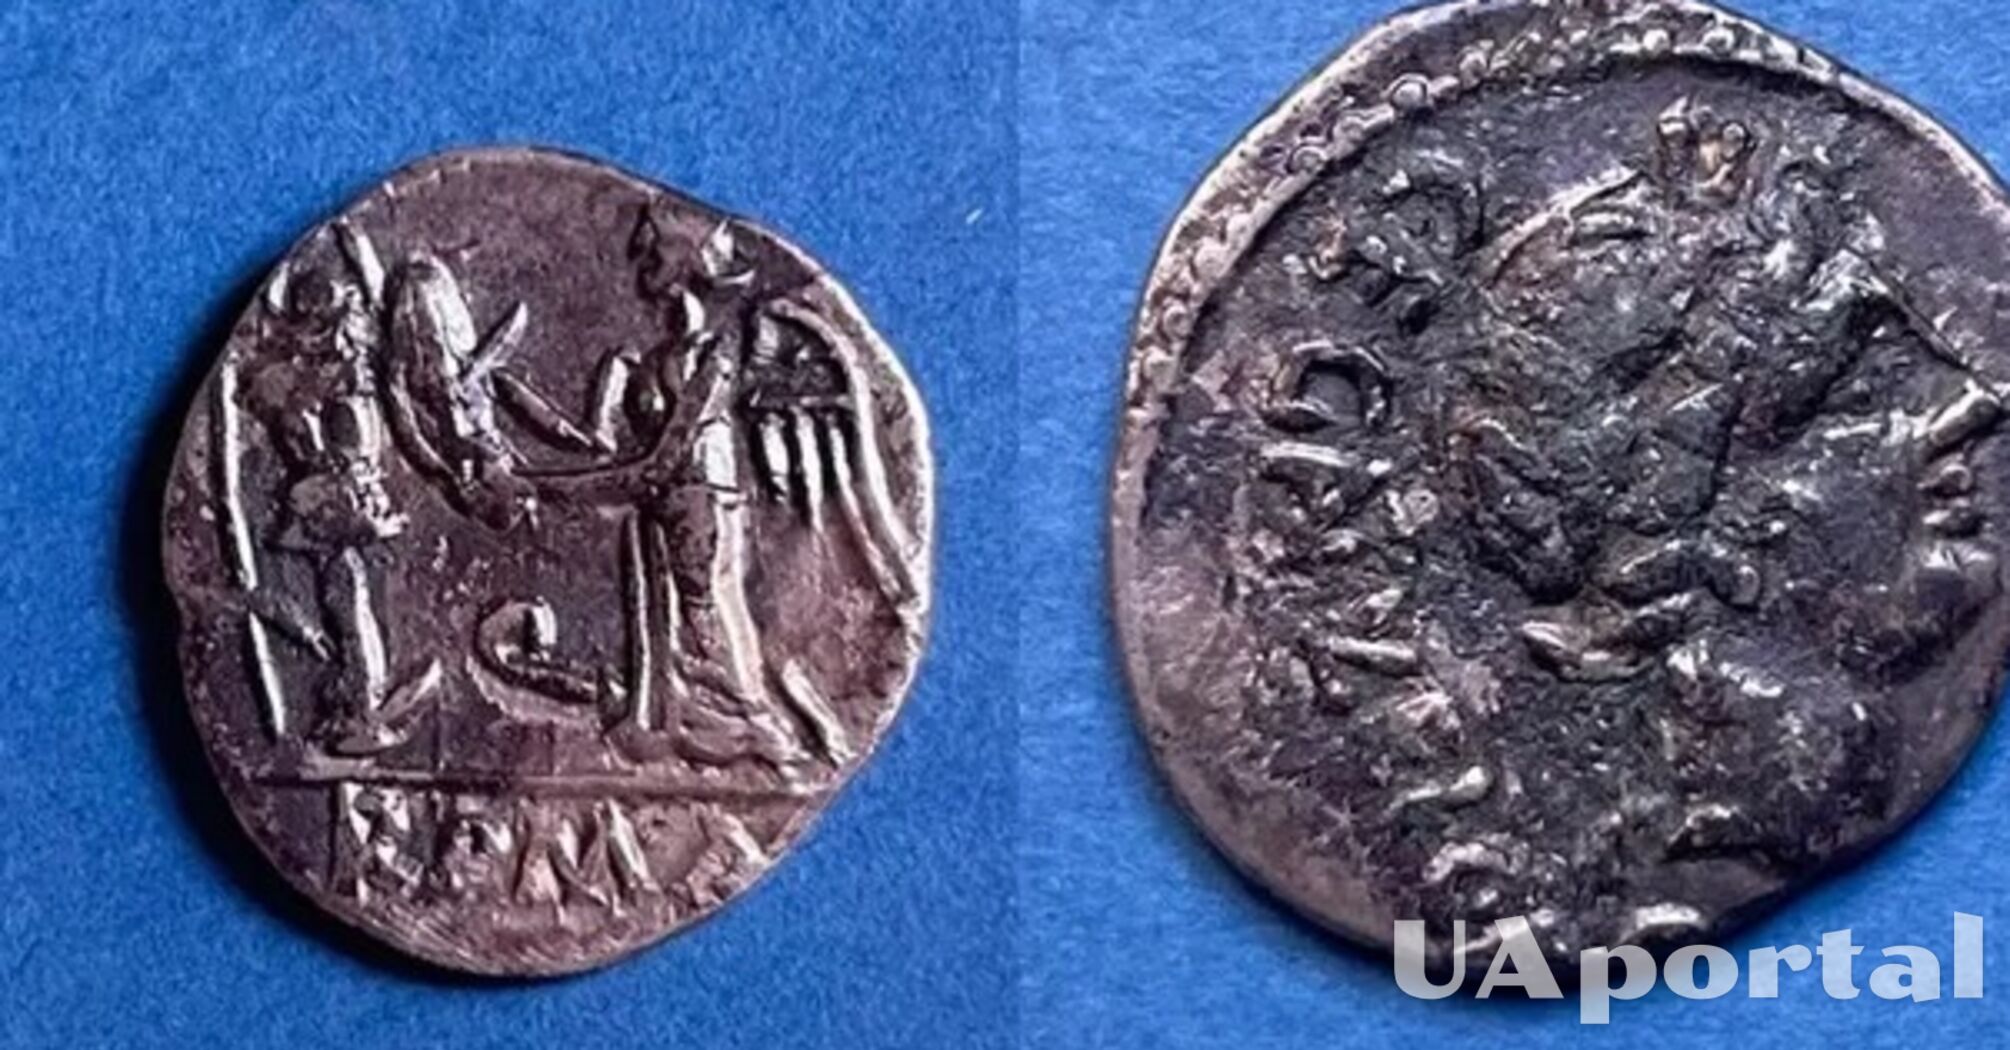 Gems and ancient coins found near Bologna in Italy (photo)